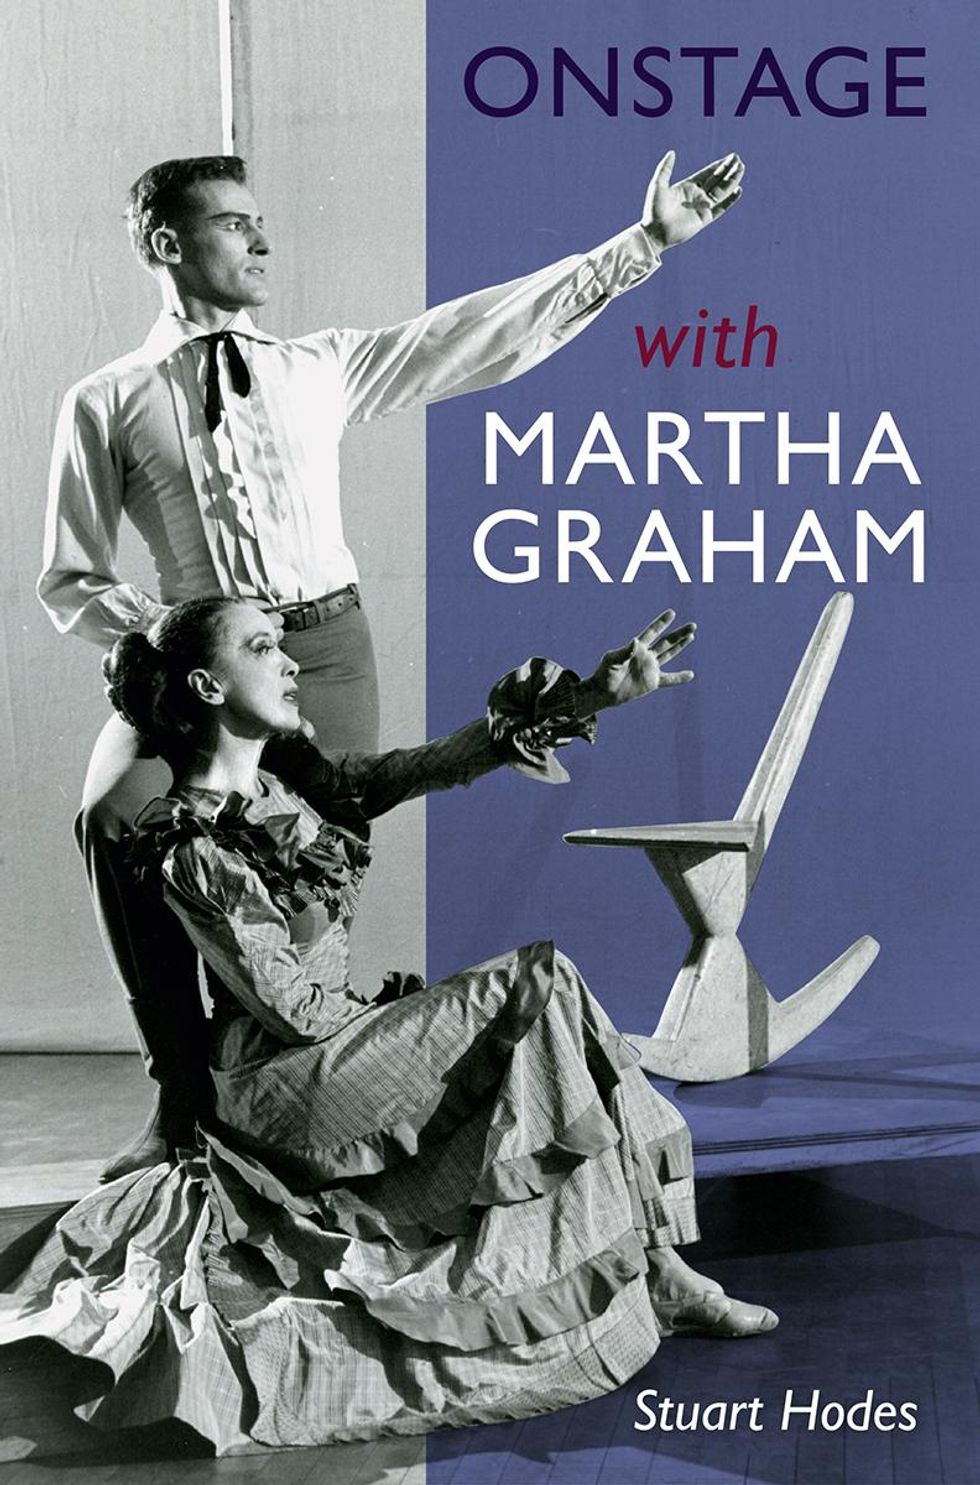 Book cover: Text says "Onstage With Martha Graham" and the author Stuart Hodes above a black and white image of Stuart standing behind Martha